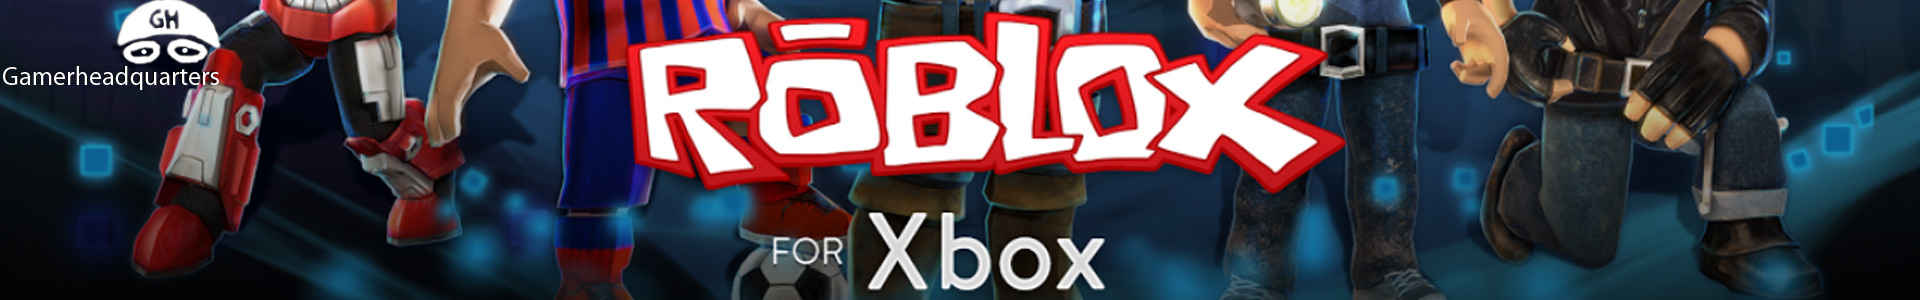 Roblox Xbox One Review Gamerheadquarters - roblox xbox one review